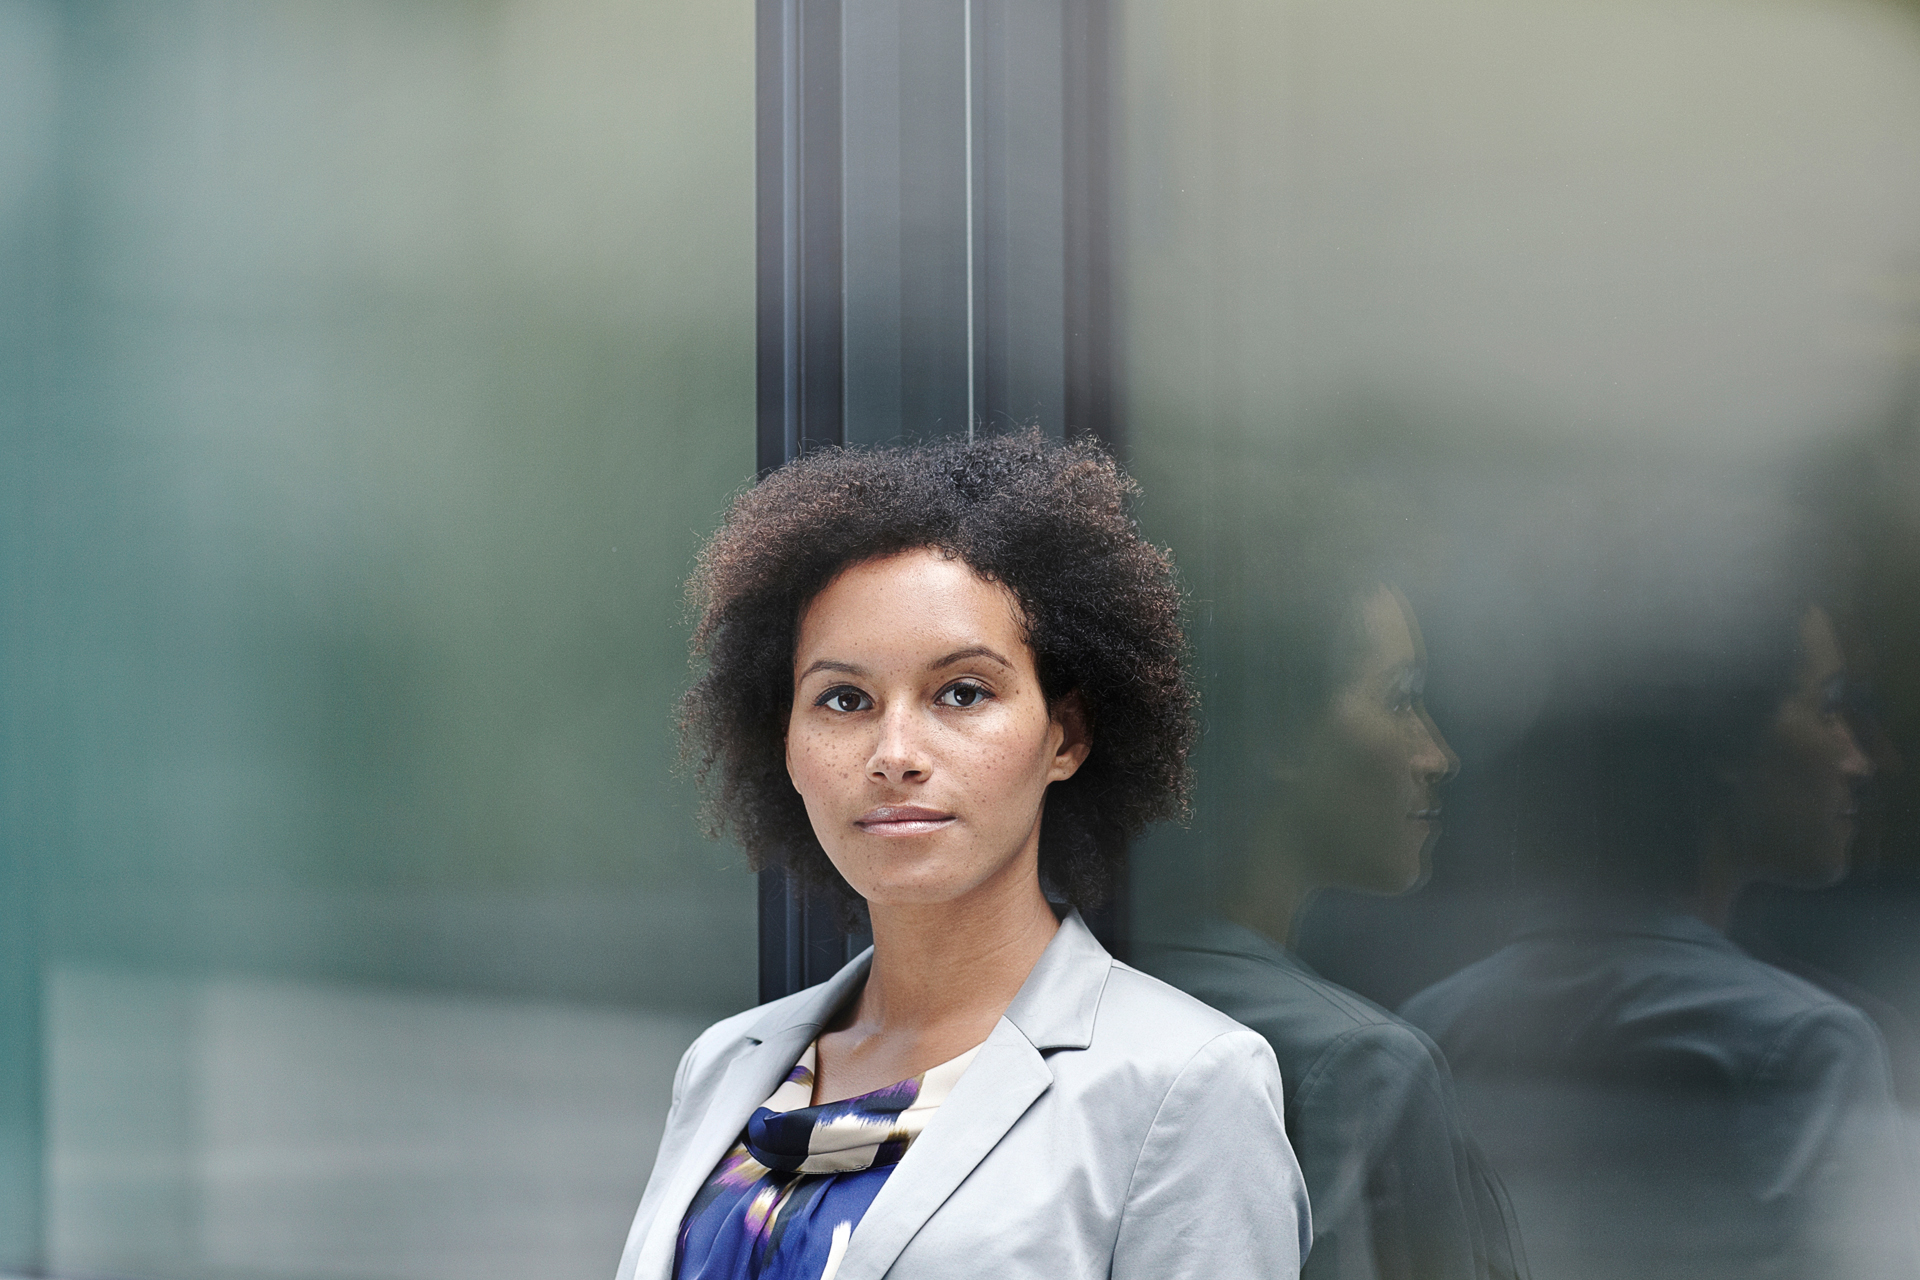 corporate photography portrait of business woman smiling looking at camera